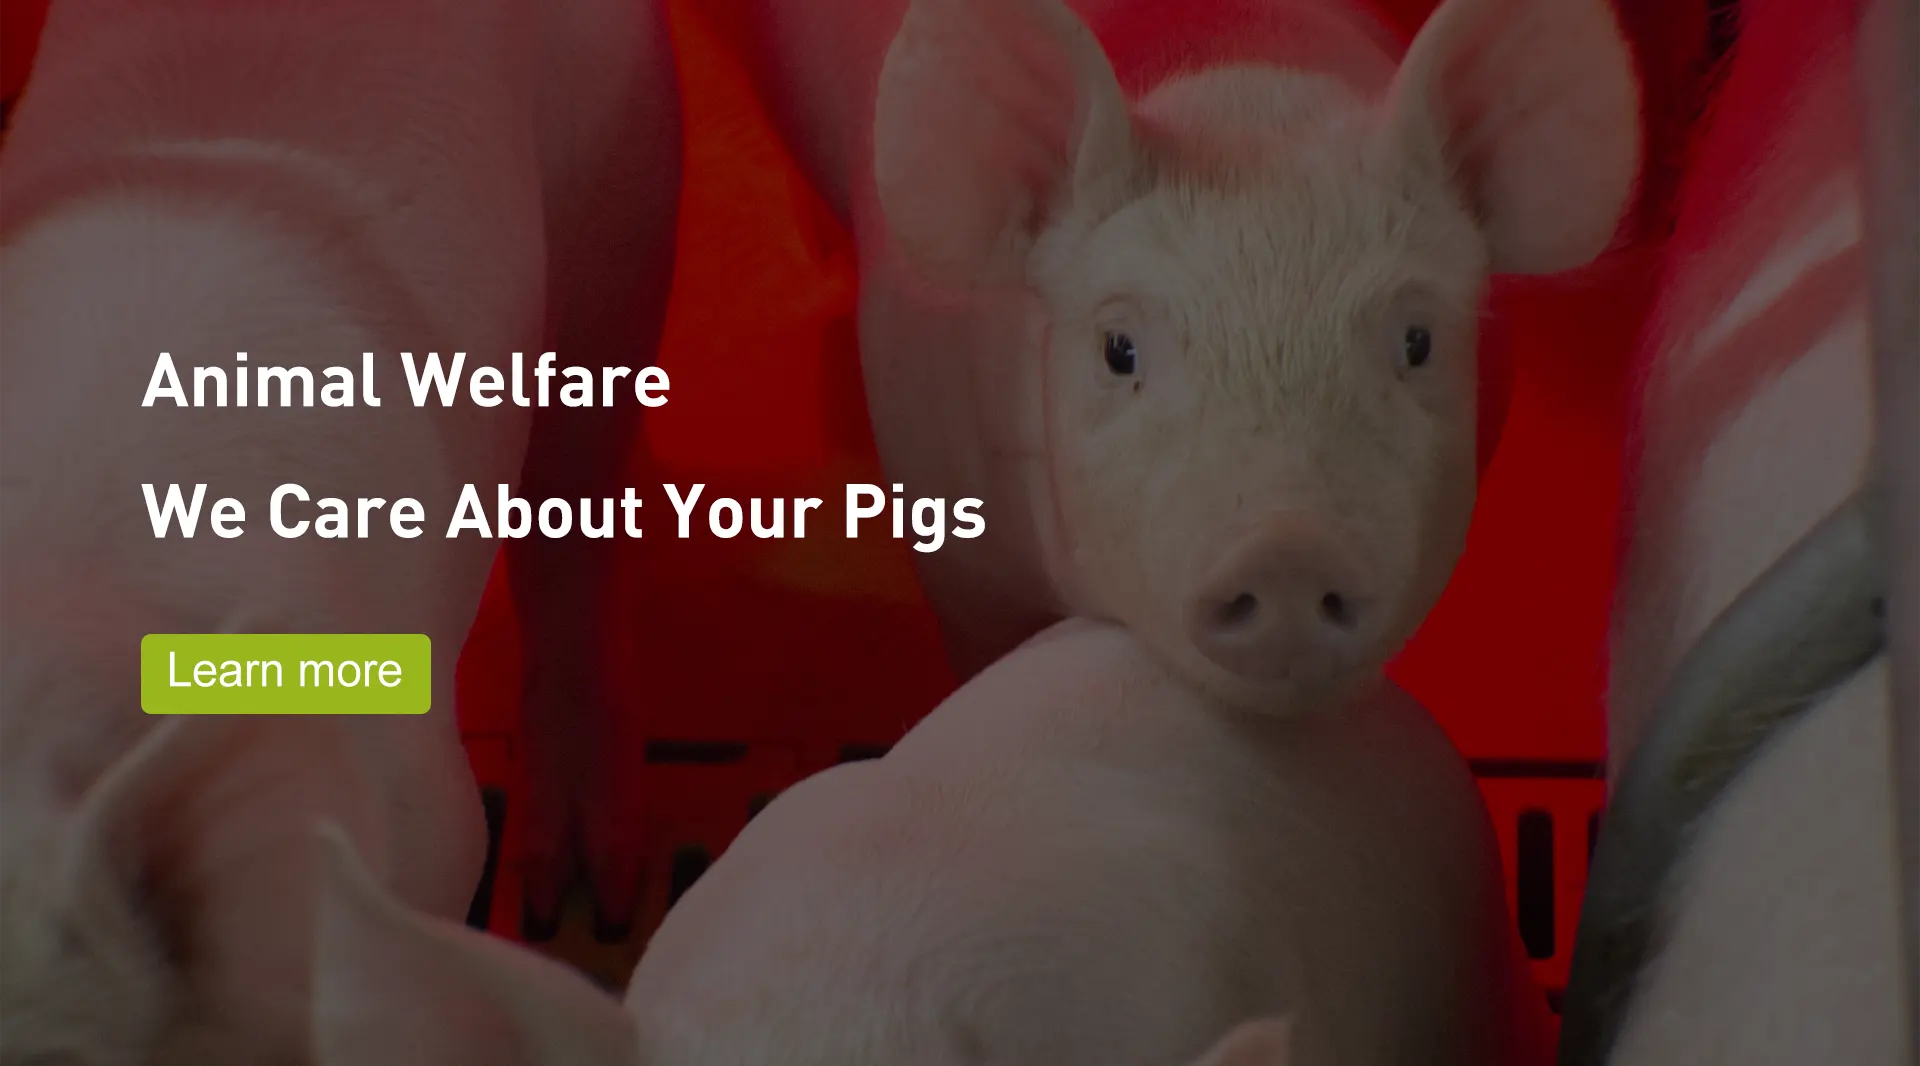 Pig Welsafe Farrowing Crate Manufacturers